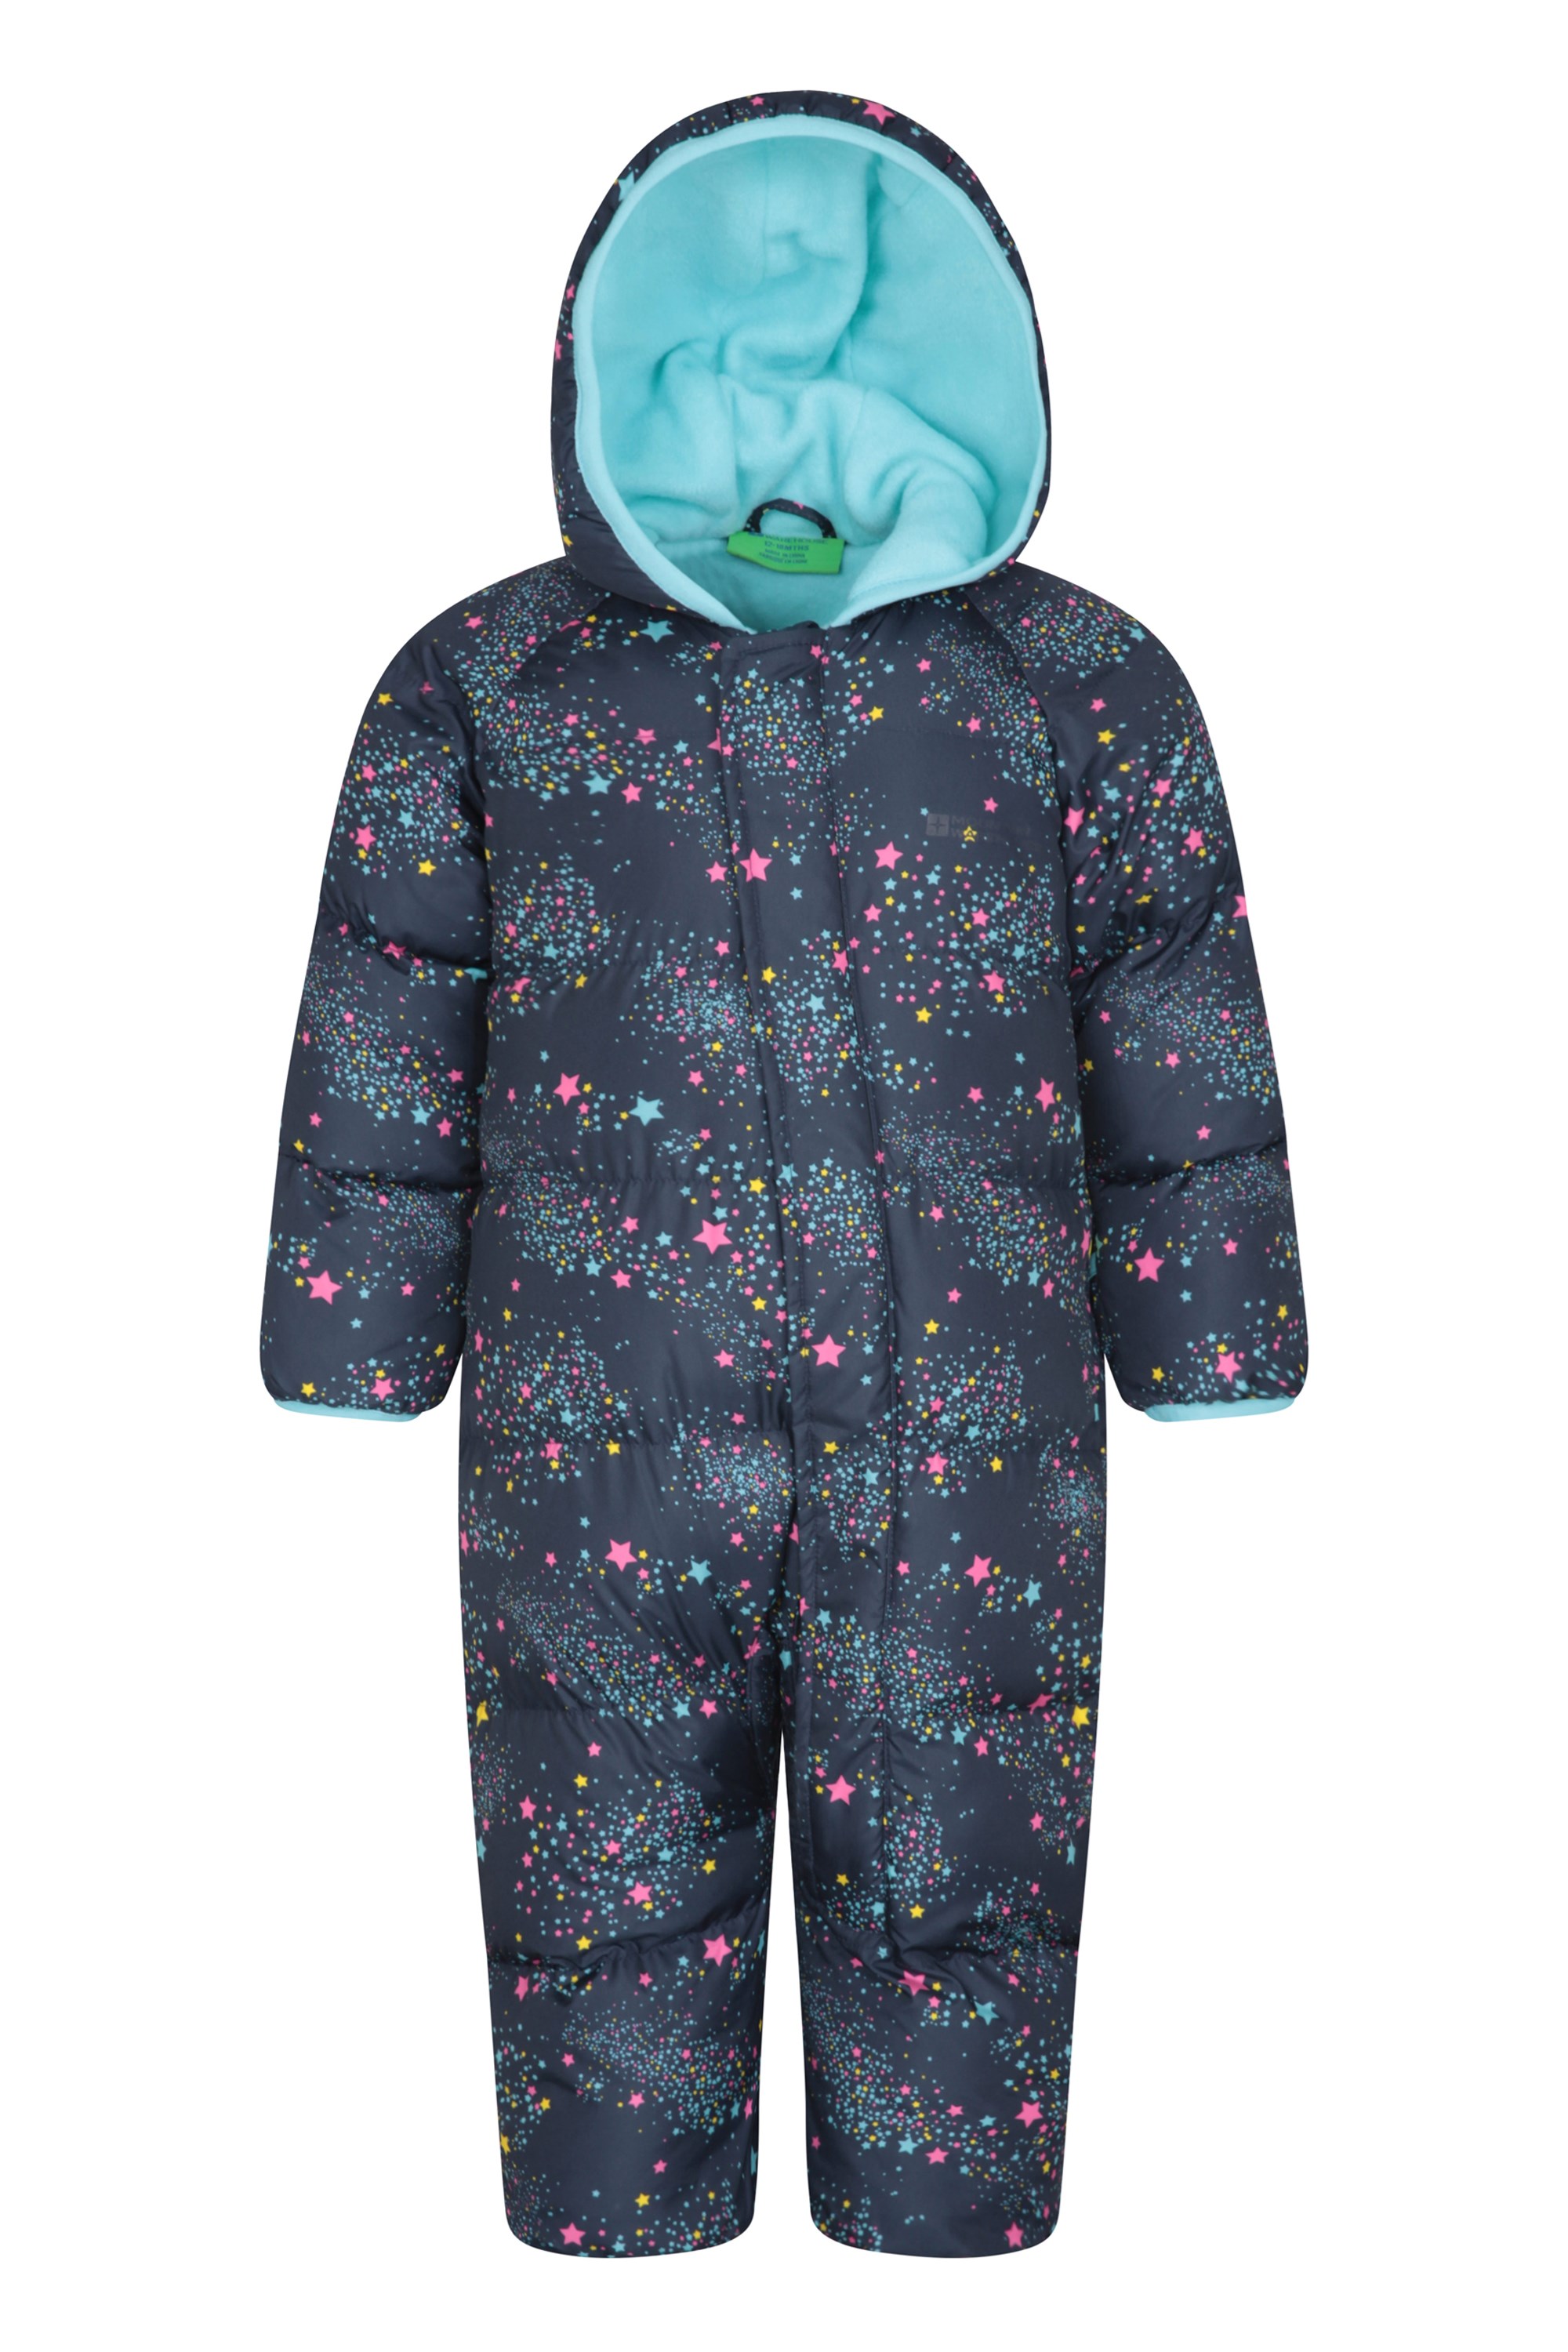 Mountain Warehouse Frosty Toddler Padded Suit Fleece Lined Snowsuit